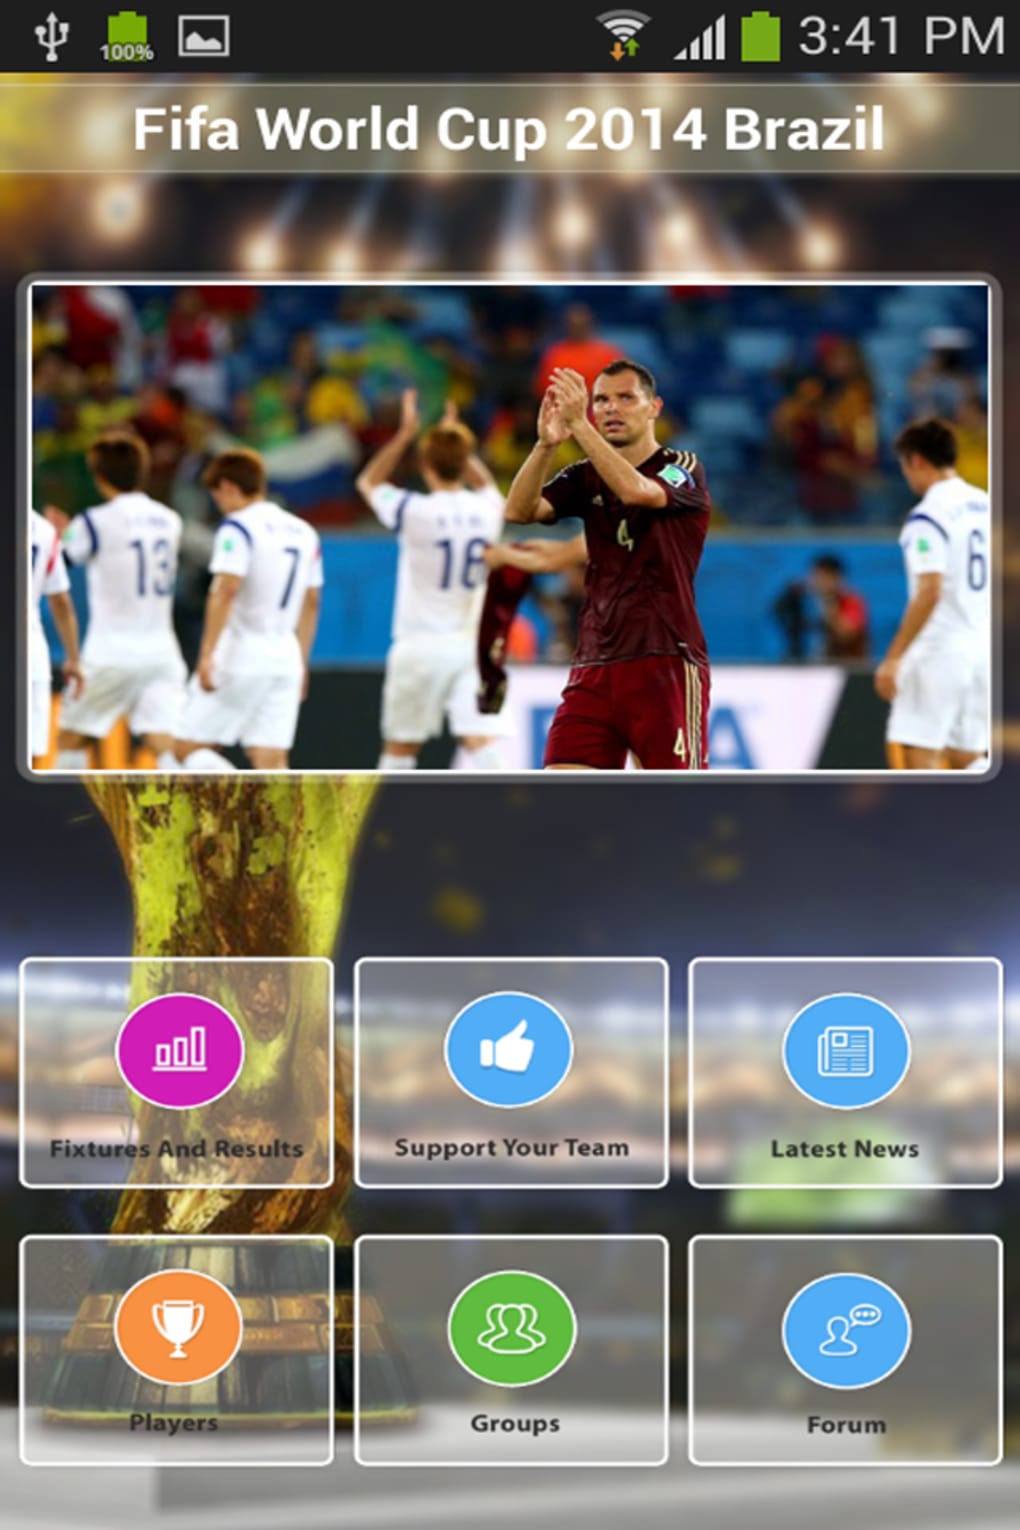 Brazil News and Media - APK Download for Android